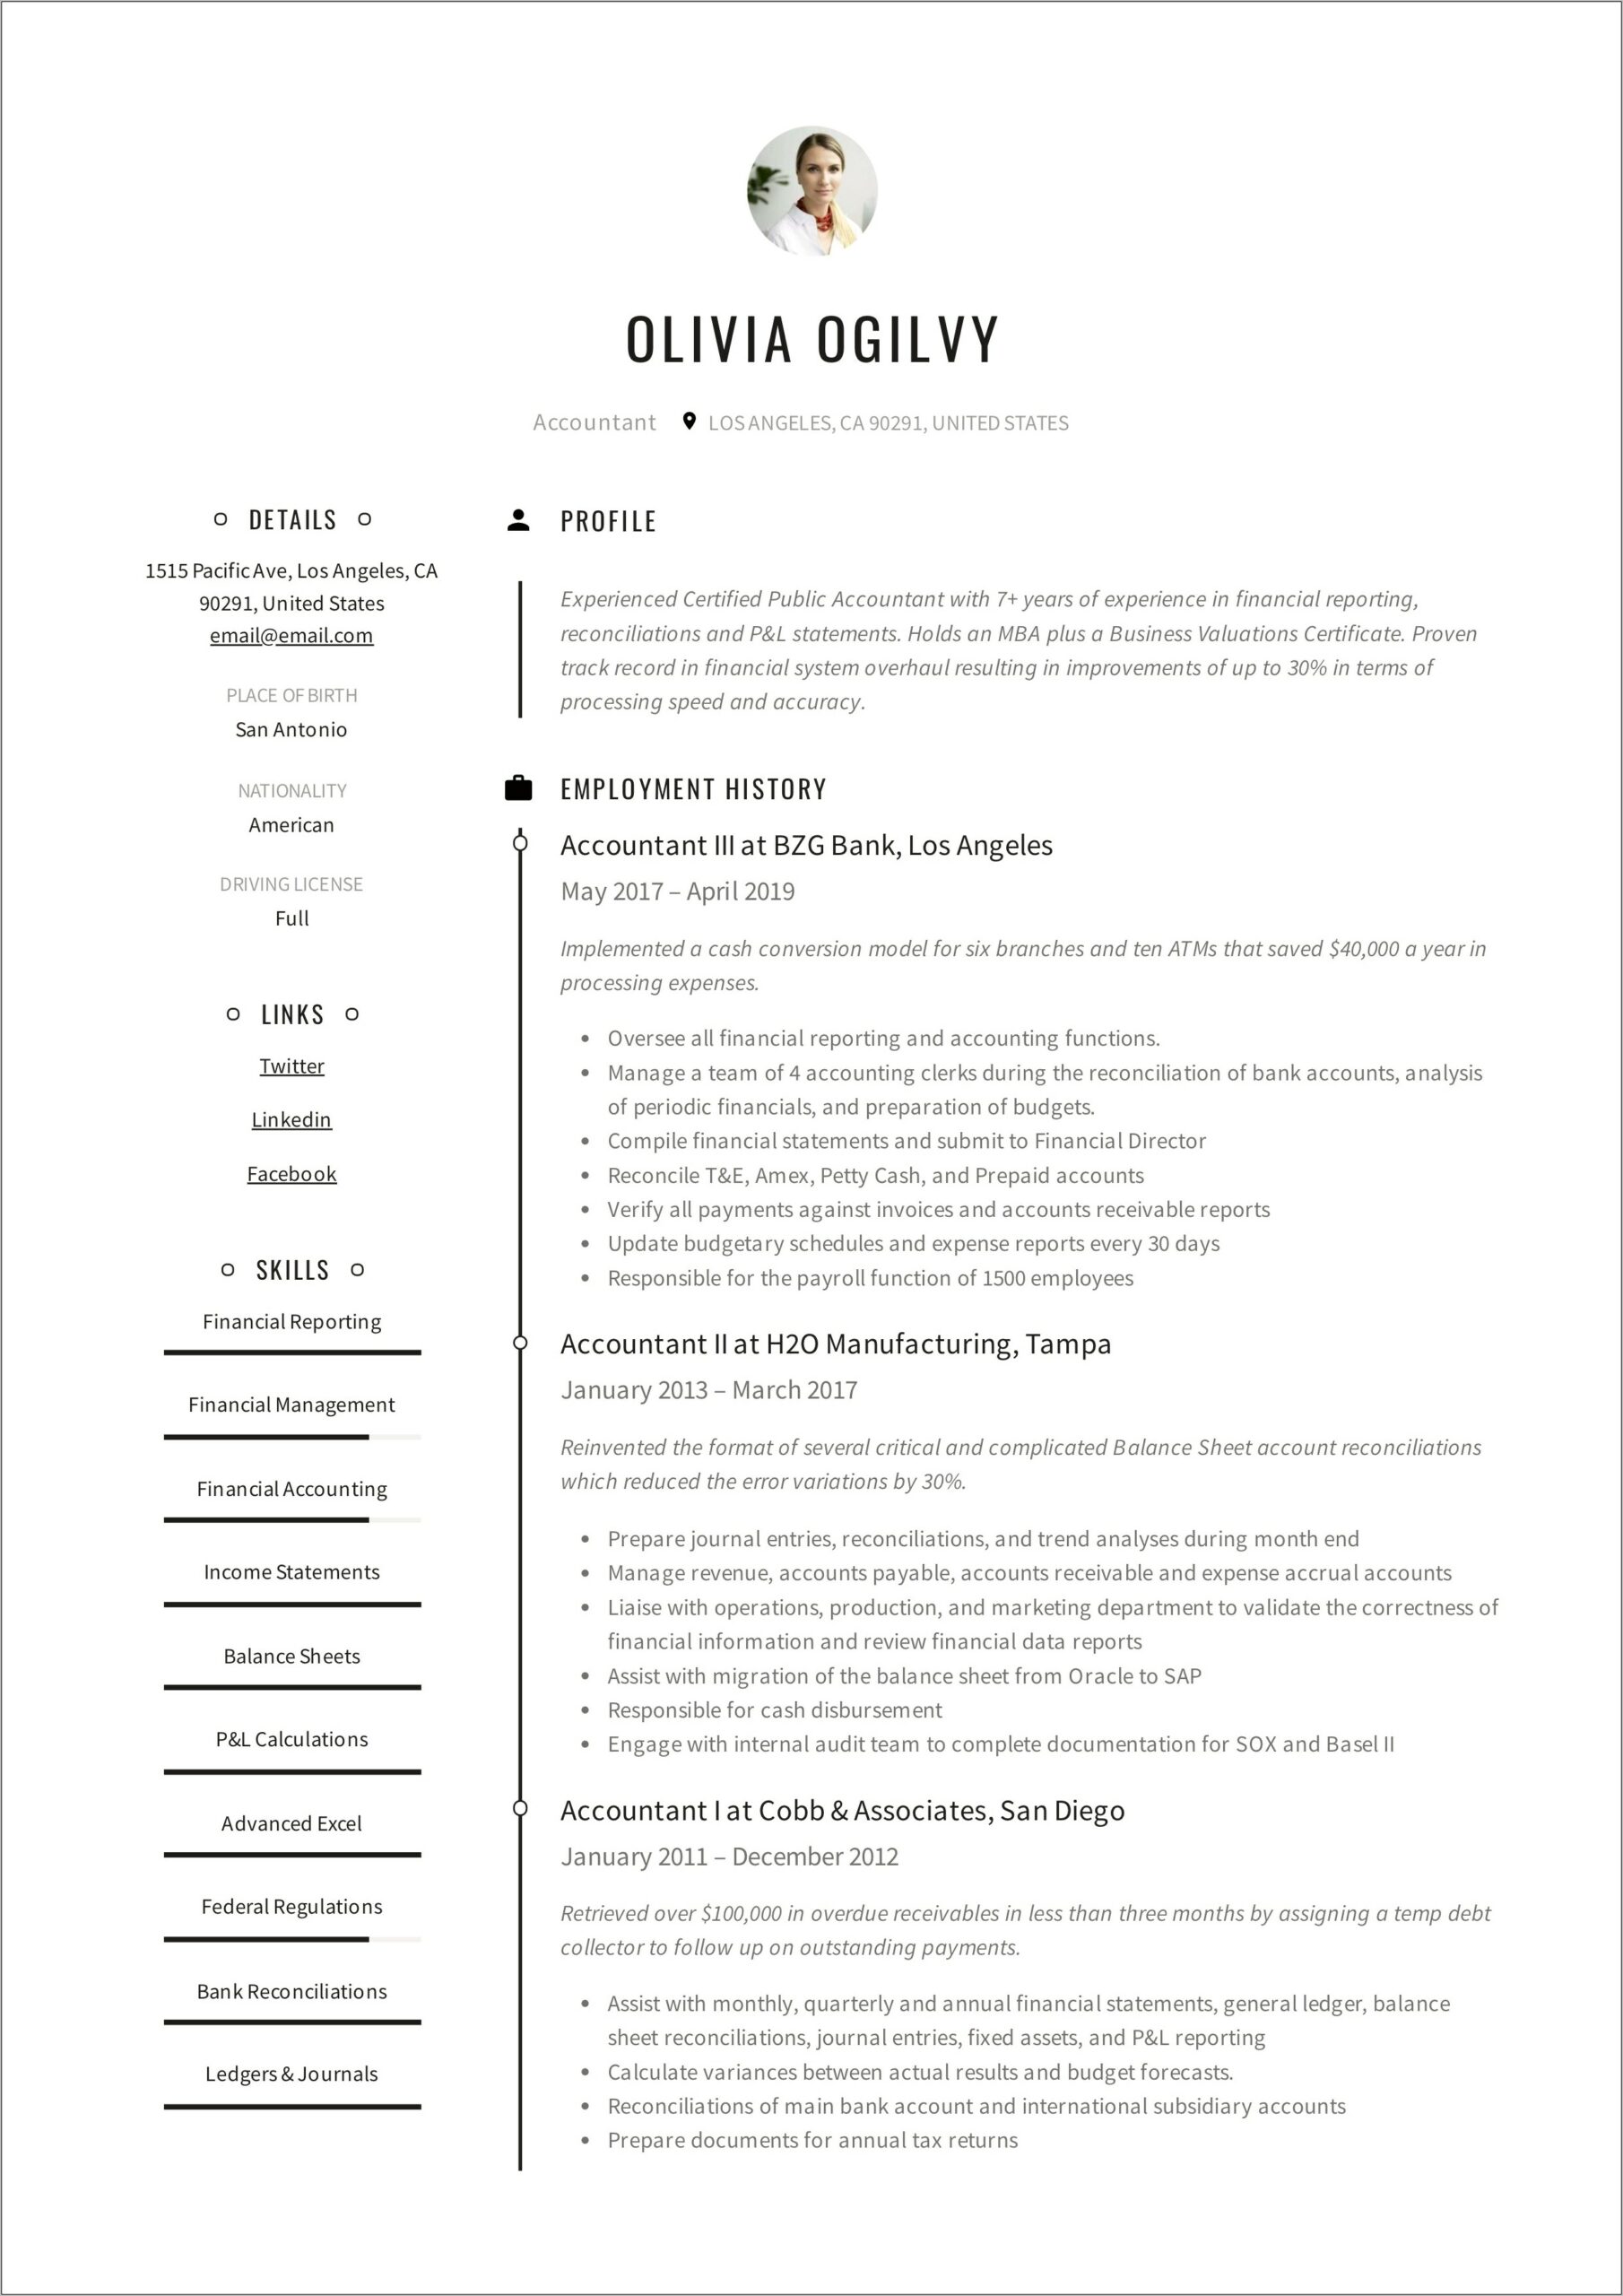 Chartered Accountant Resume Format In Word